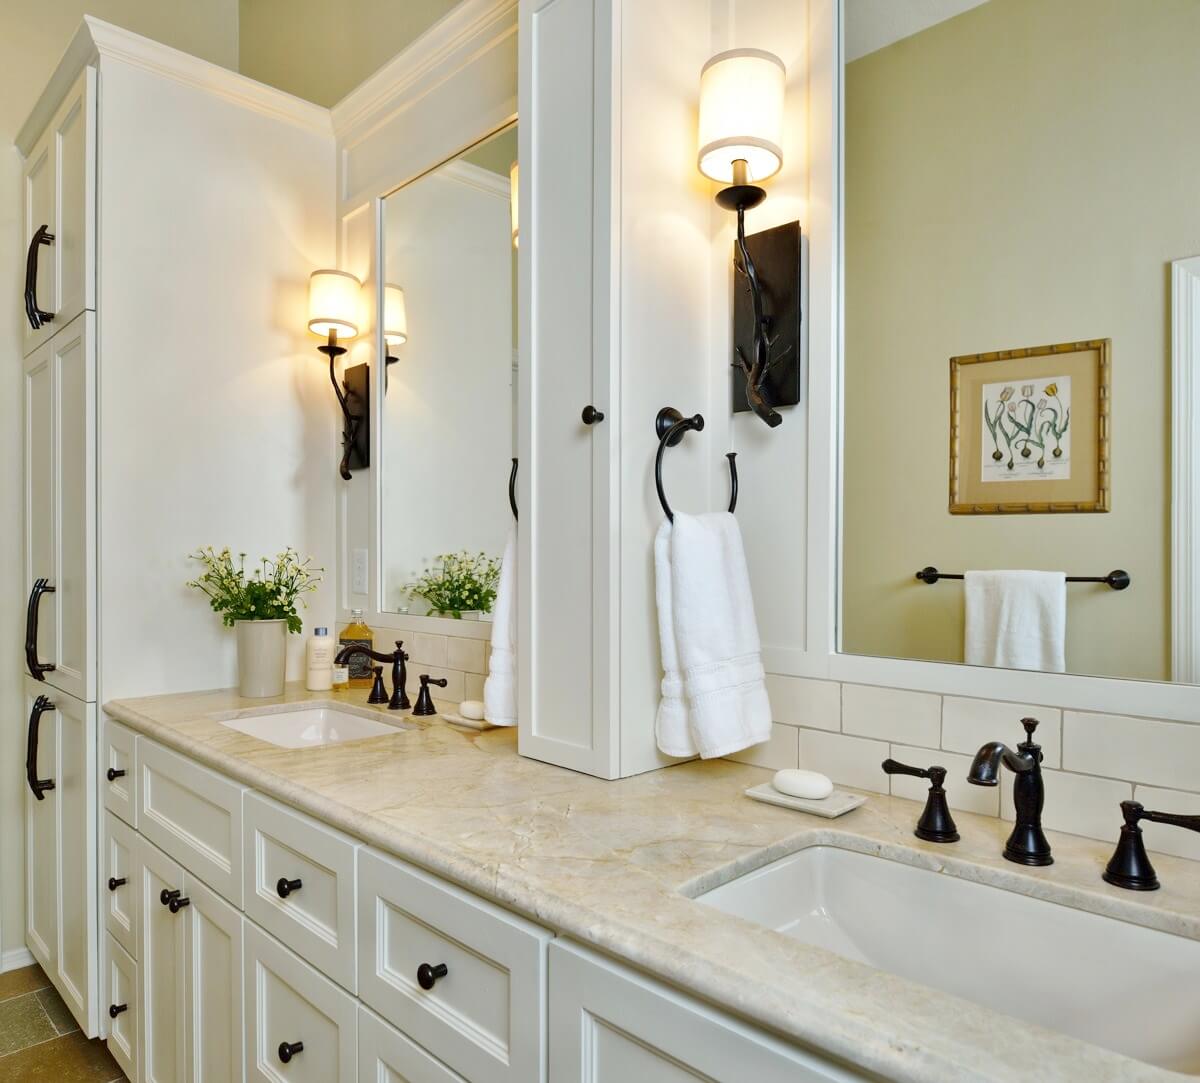 The 18 Inch Deep Upper Bathroom Cabinet   Include One In Your Next ...